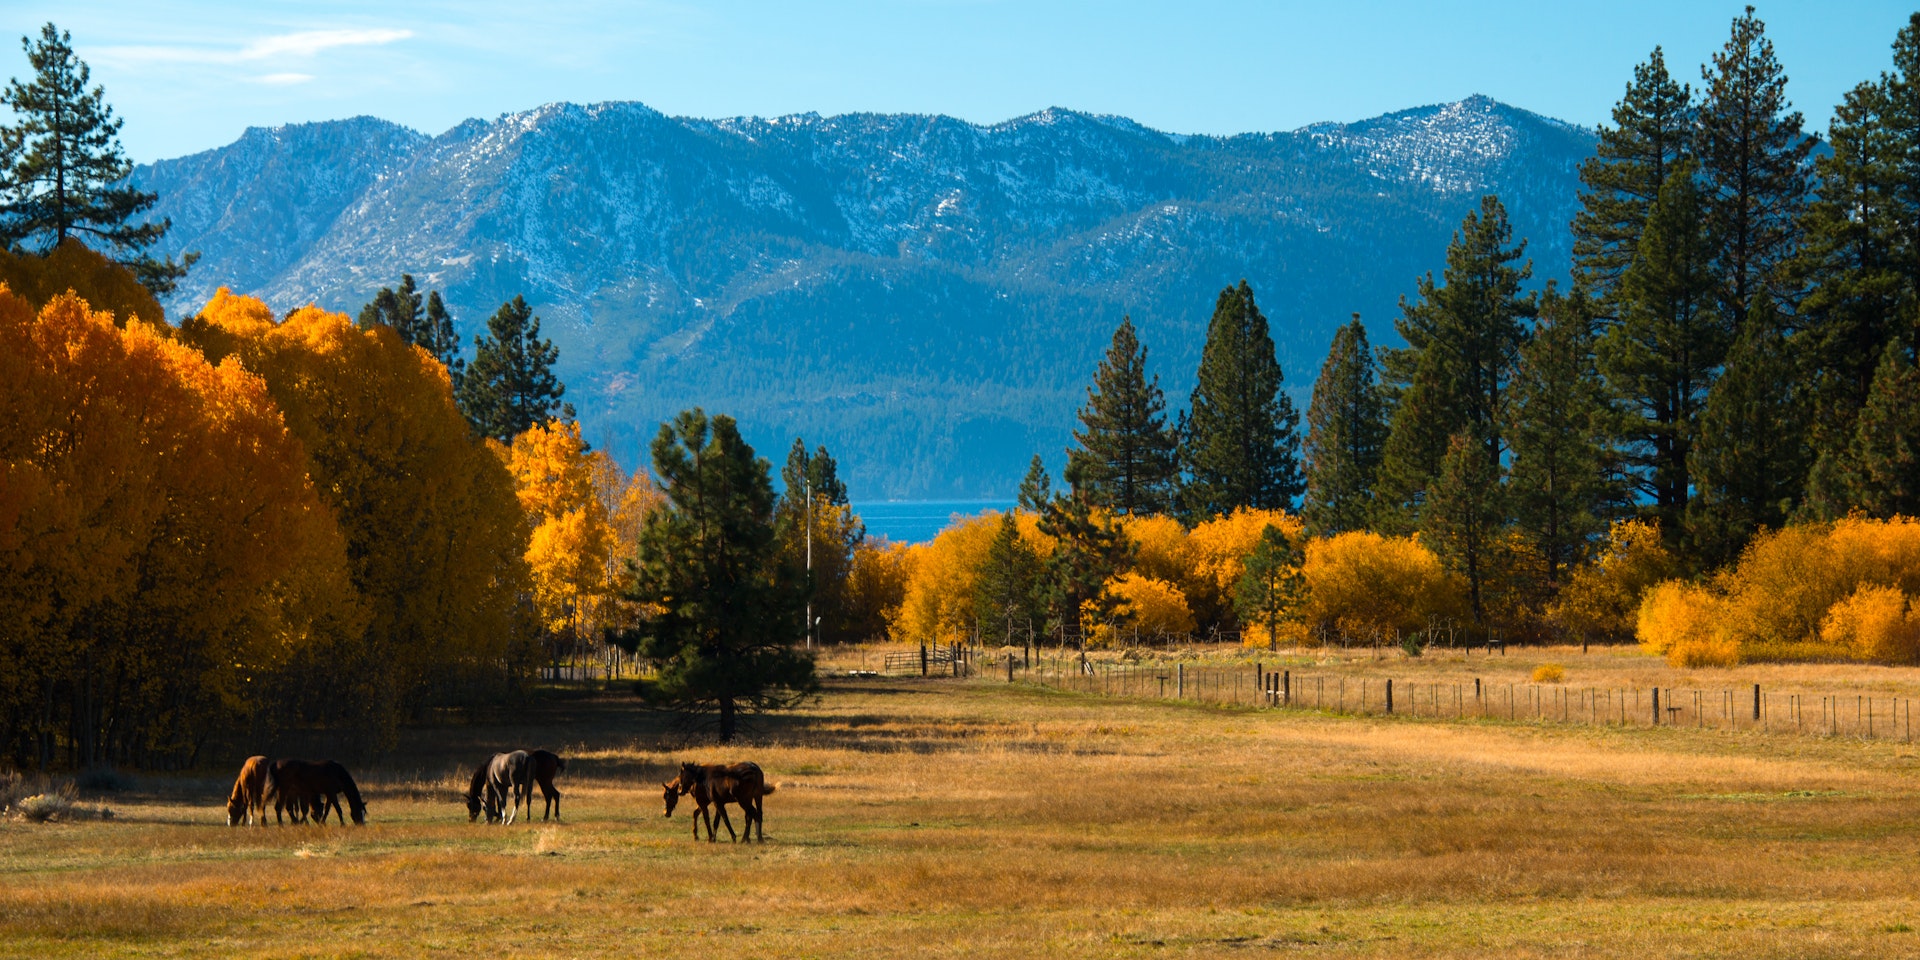 Horses in the forefront, Lake Tahoe in background